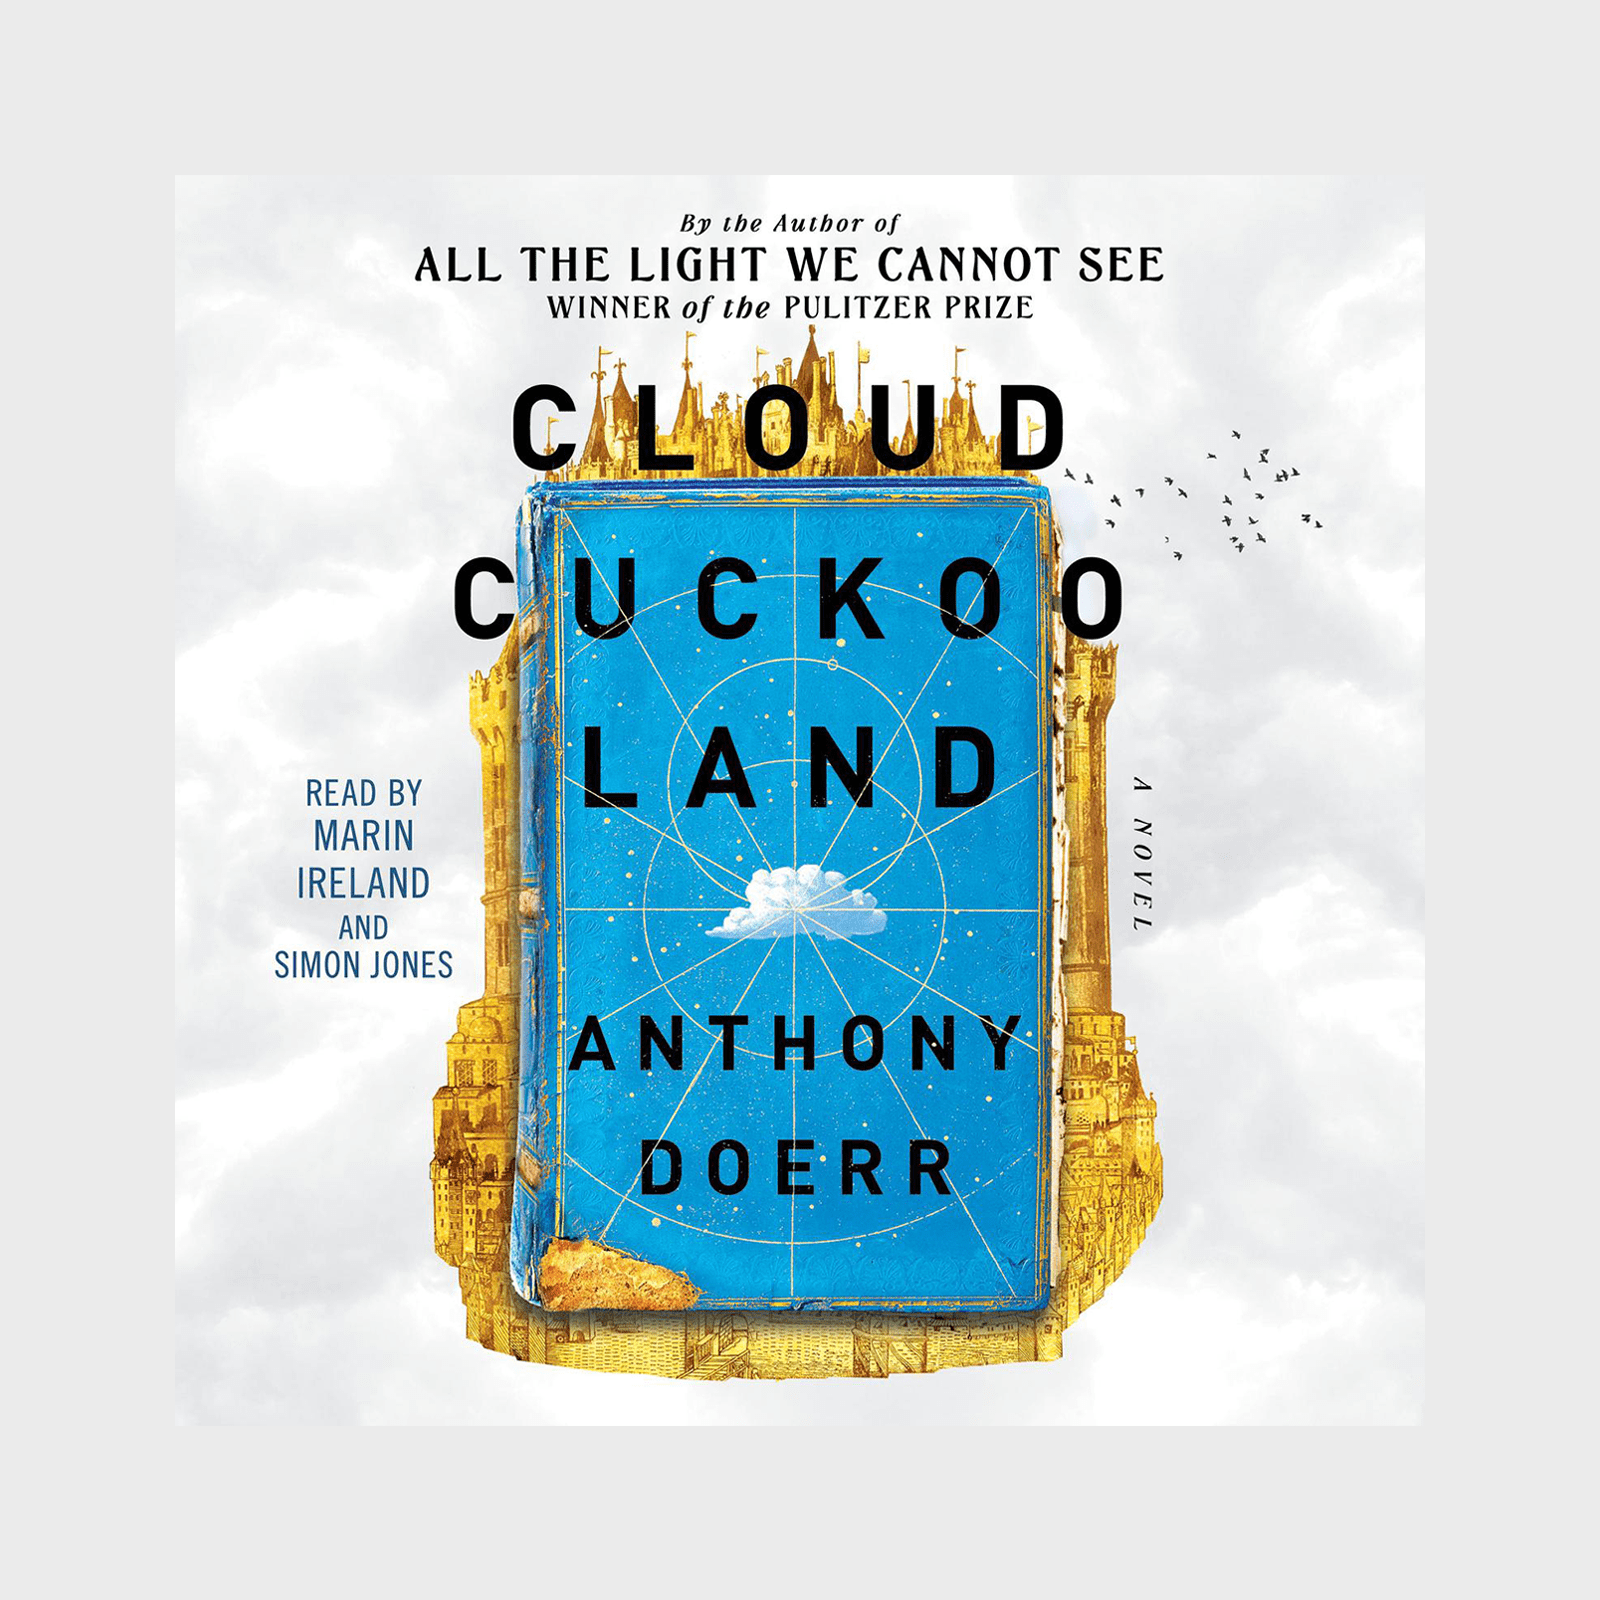 <h3 class=""><strong><em>Cloud Cuckoo Land</em> by Anthony Doerr</strong></h3> <p>In Pulitzer Prize winner Anthony Doerr's newest novel, five characters all have one thing in common, in spite of spanning almost 600 years: their love for a long-lost and, at times, nonsensical story written by the ancient Greek author Antonius Diogenes. For them, this story has a massive impact and is alternately entertaining, consoling, motivating, even life-saving. One of the <a href="https://www.rd.com/list/best-fiction-books/" rel="noopener noreferrer">best fiction books</a> of the year, <a href="https://www.amazon.com/Cloud-Cuckoo-Land-A-Novel/dp/B08TX66JJ7" rel="noopener noreferrer"><em>Cloud Cuckoo Land</em></a> immediately won over critics and readers alike. It was on the <em>New York Times</em> best-seller list for 11 weeks and earned a spot in <em>AudioFile Magazine</em>'s Best Audiobooks of 2021. It has also been named a <em>New York Times </em>Notable Book, a Barack Obama Favorite, a National Book Award Finalist, and more.</p> <p class="listicle-page__cta-button-shop"><a class="shop-btn" href="https://www.amazon.com/Cloud-Cuckoo-Land-A-Novel/dp/B08TX66JJ7">Shop Now</a></p>